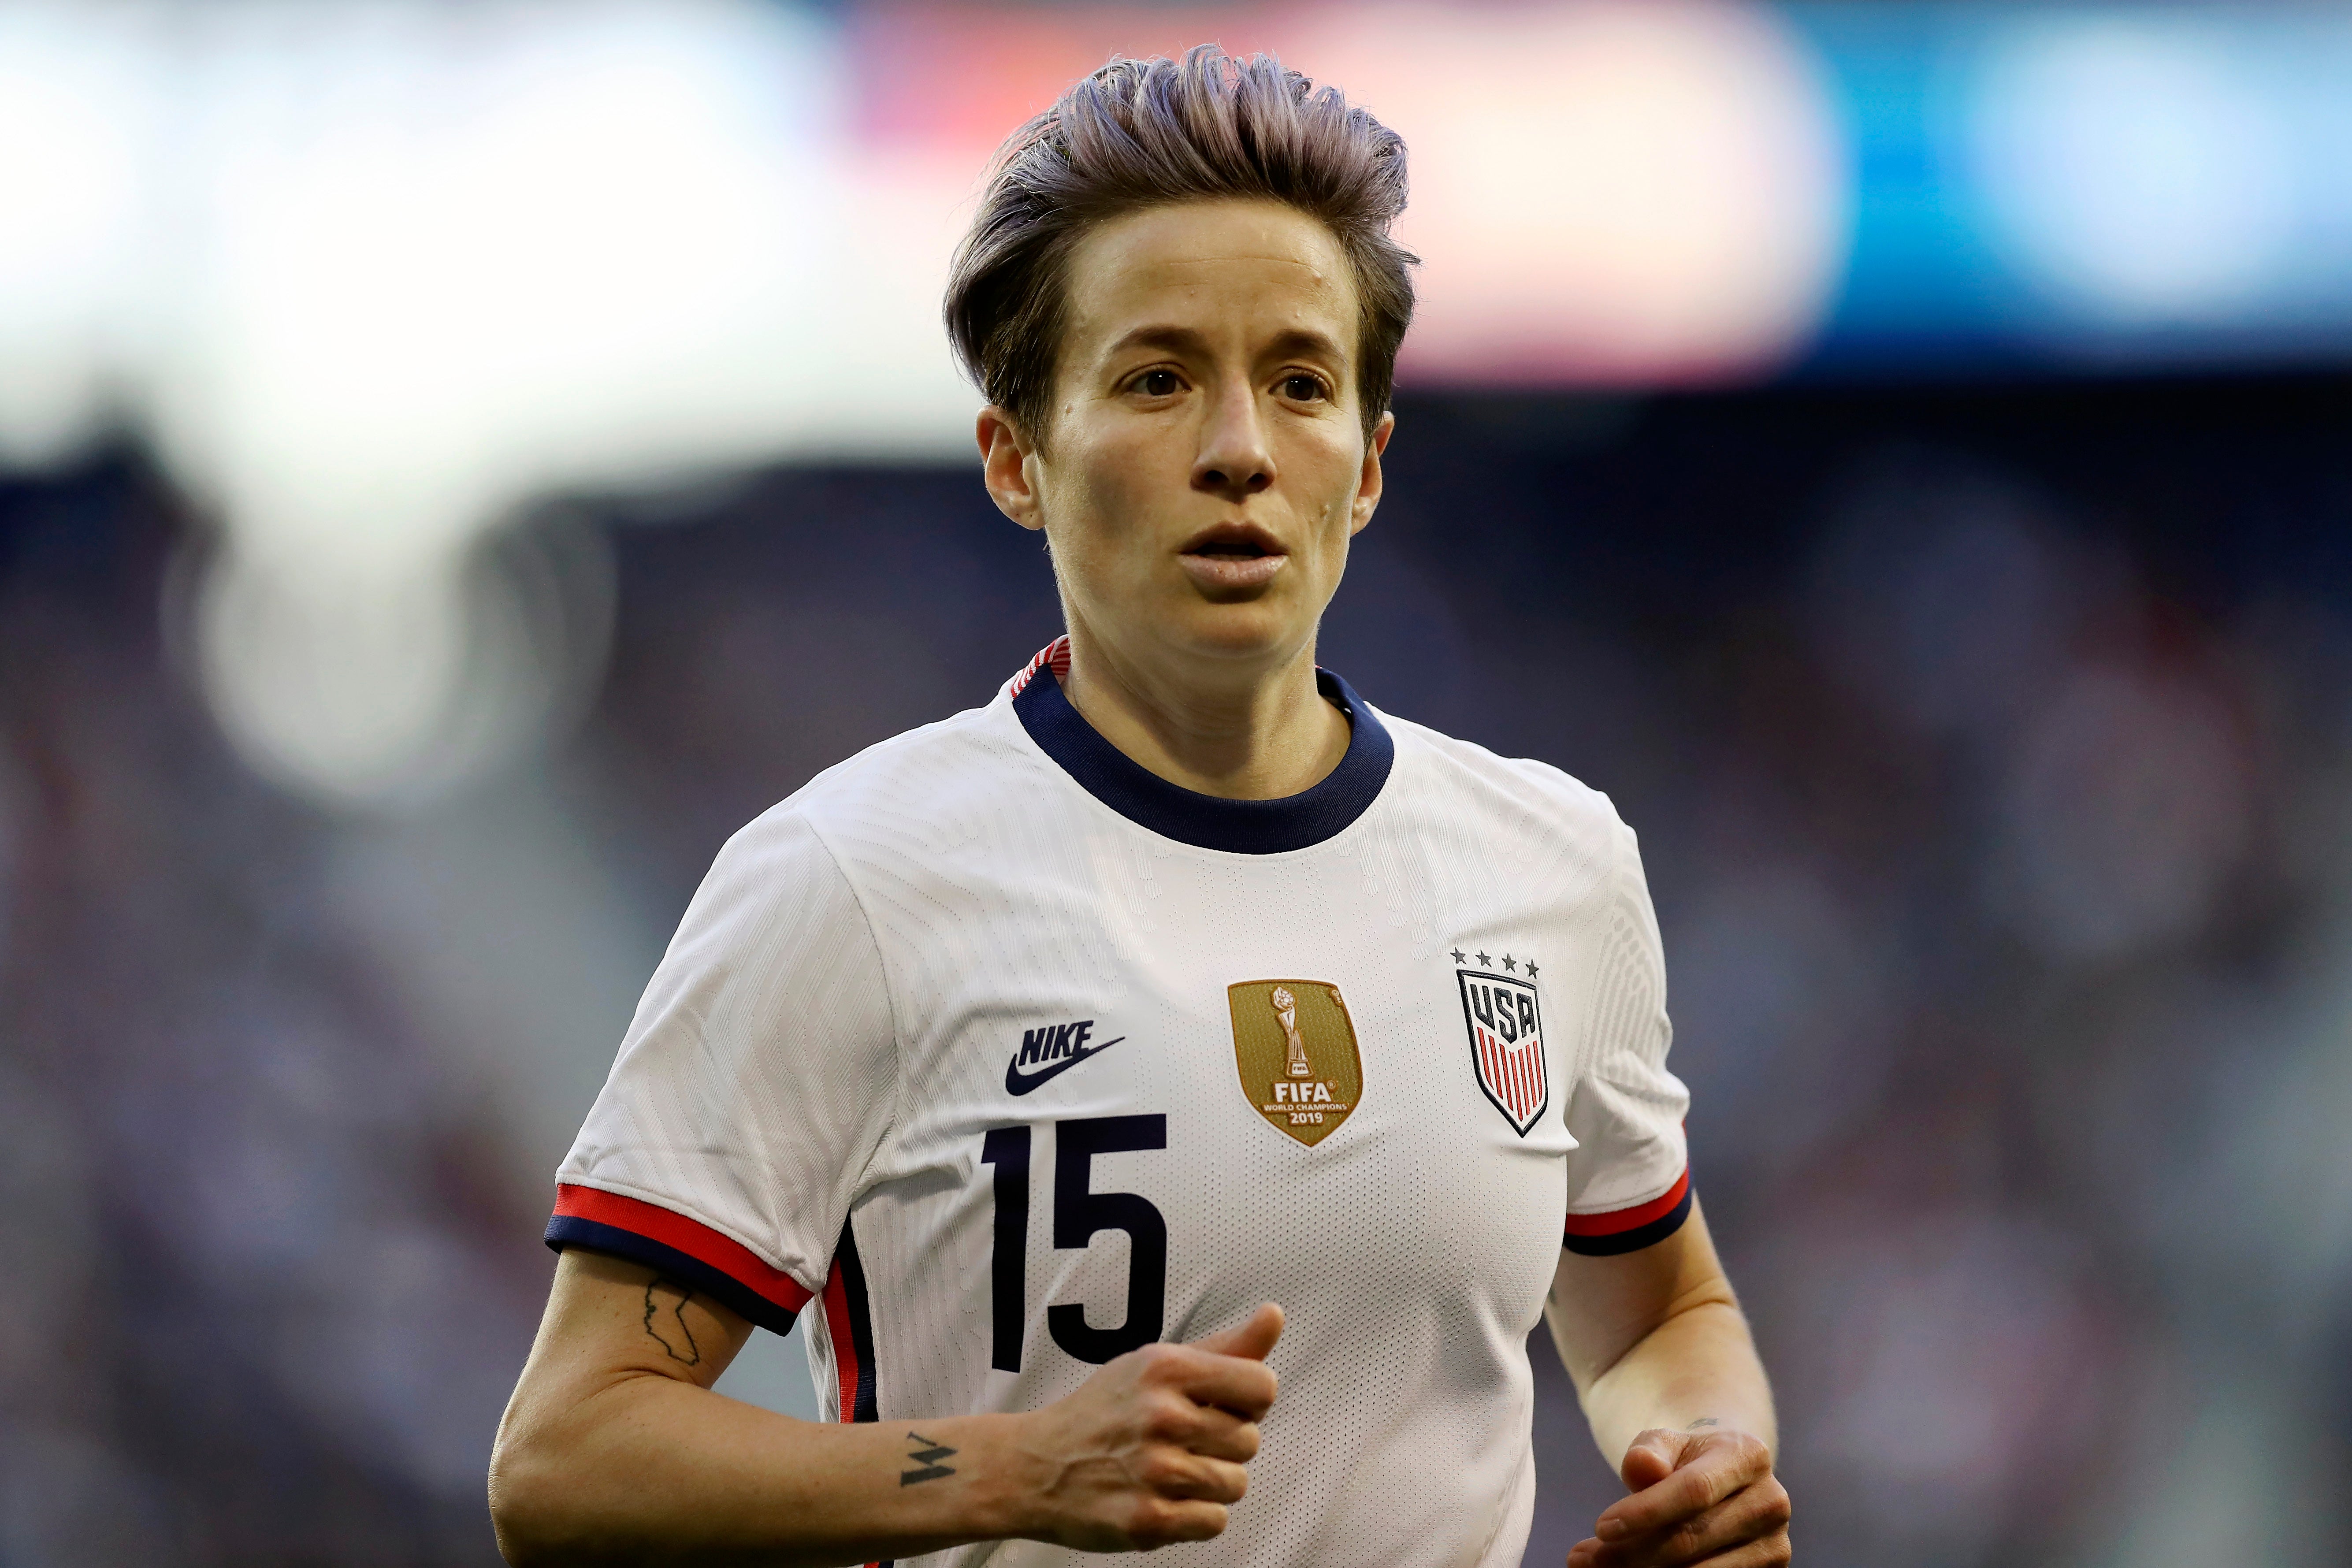 Rapinoe has emerged as a leading voice within American sport